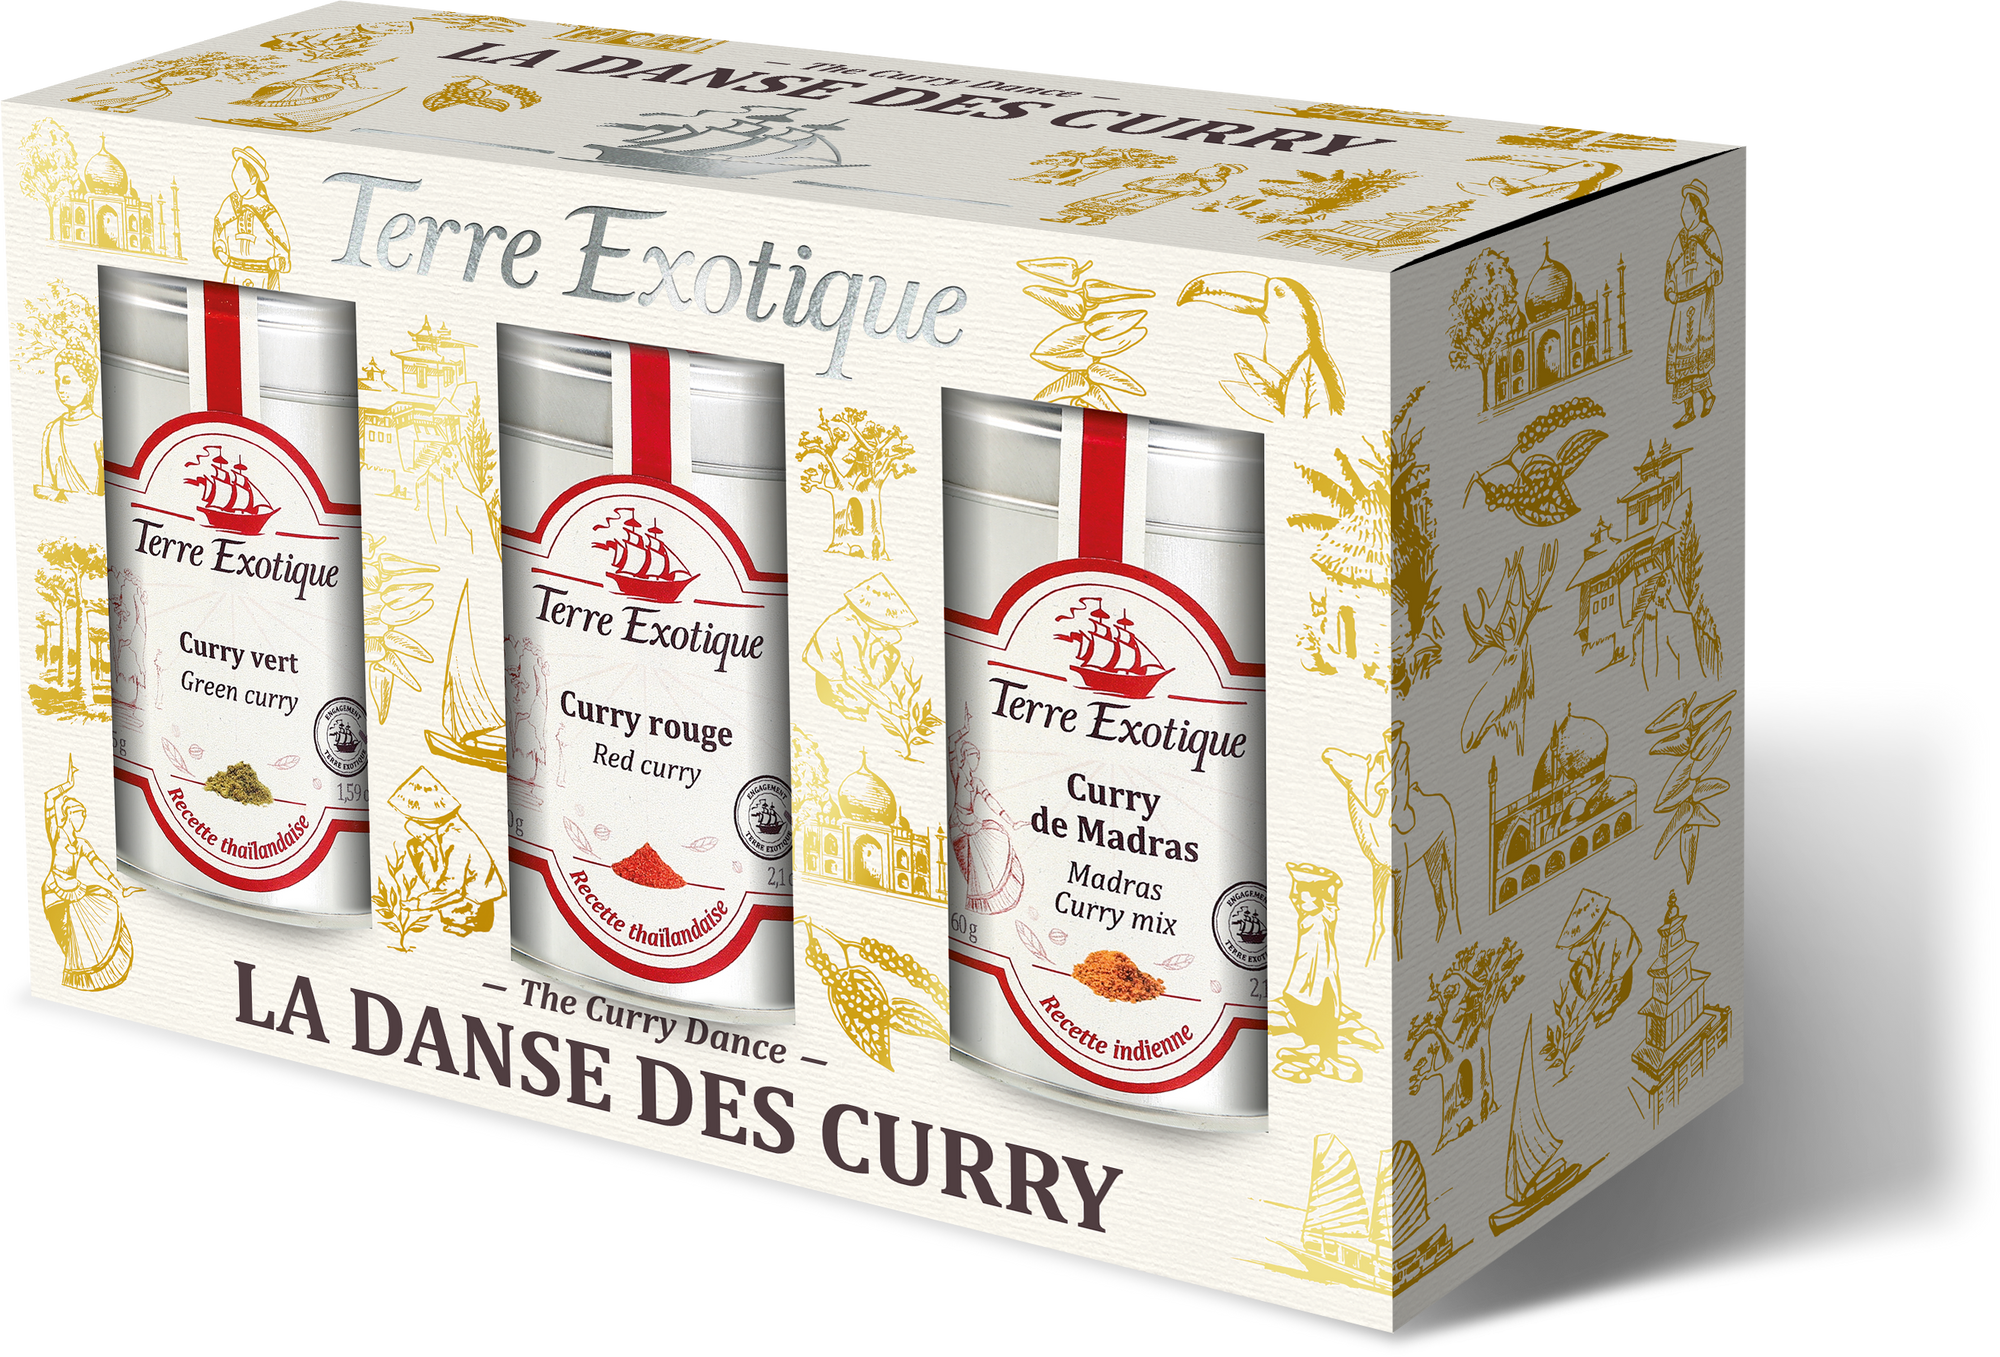 Terre Exotique 'The Curry Dance' Gift Box